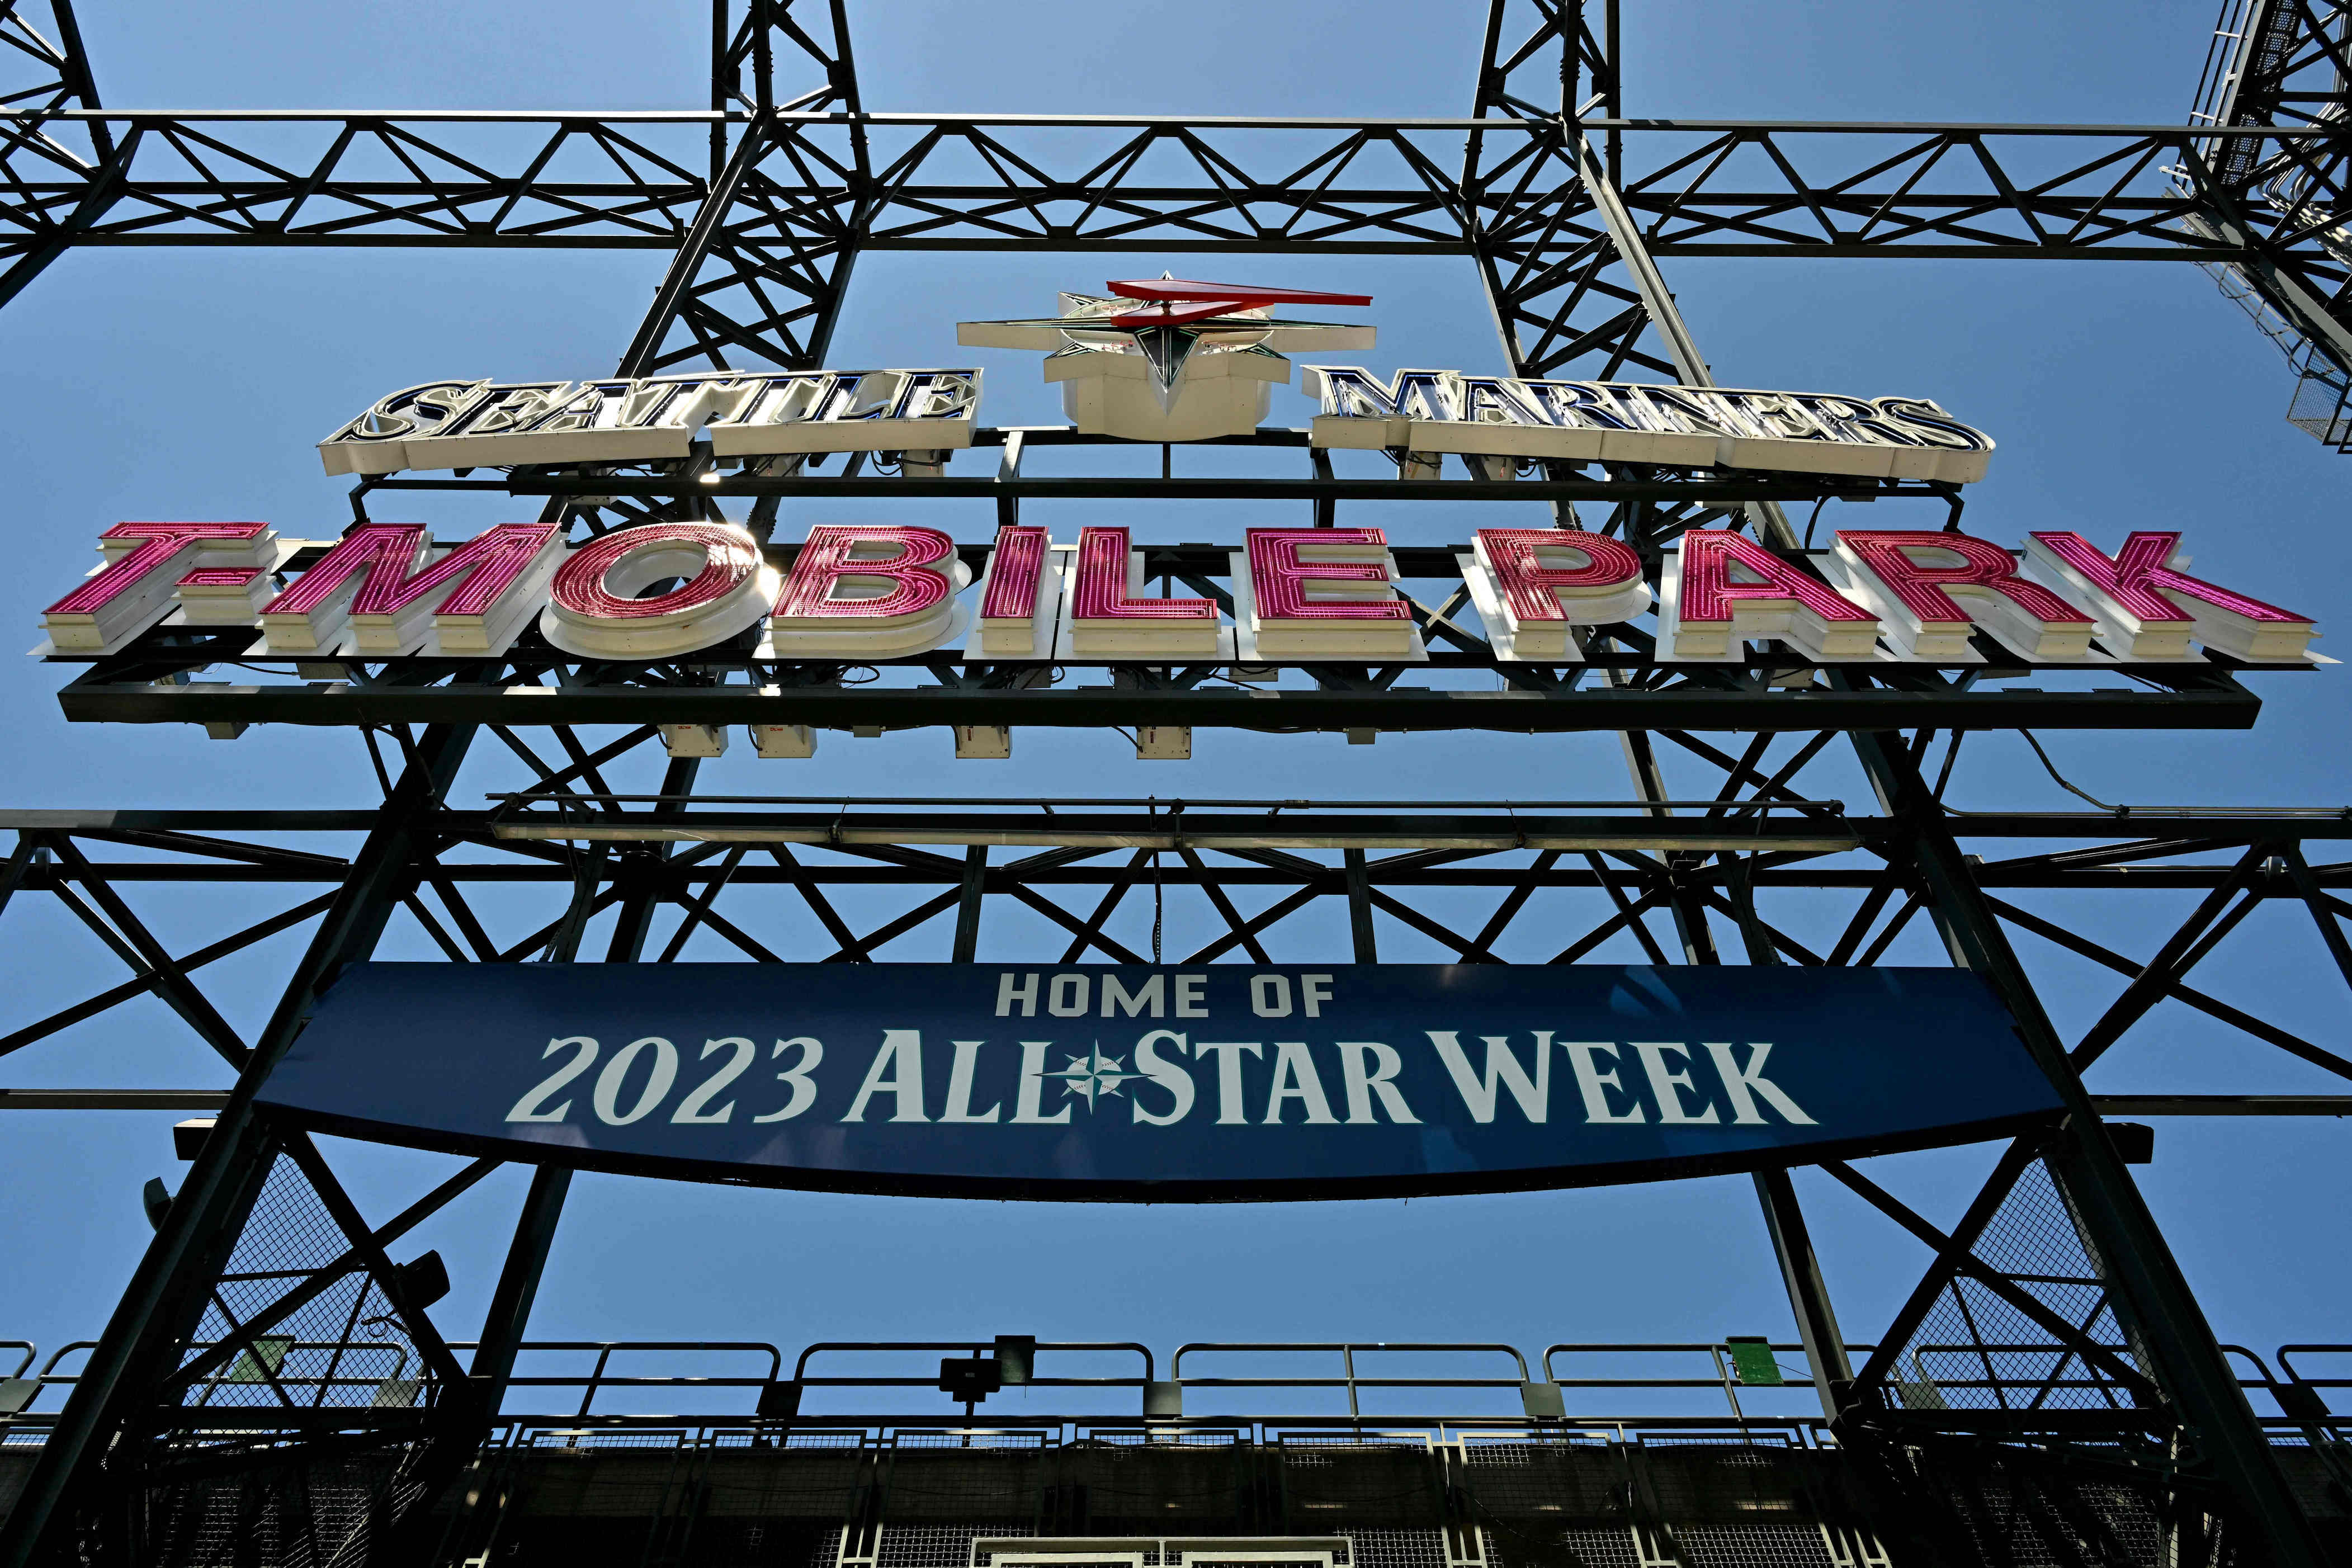 Fun facts about the MLB AllStar game